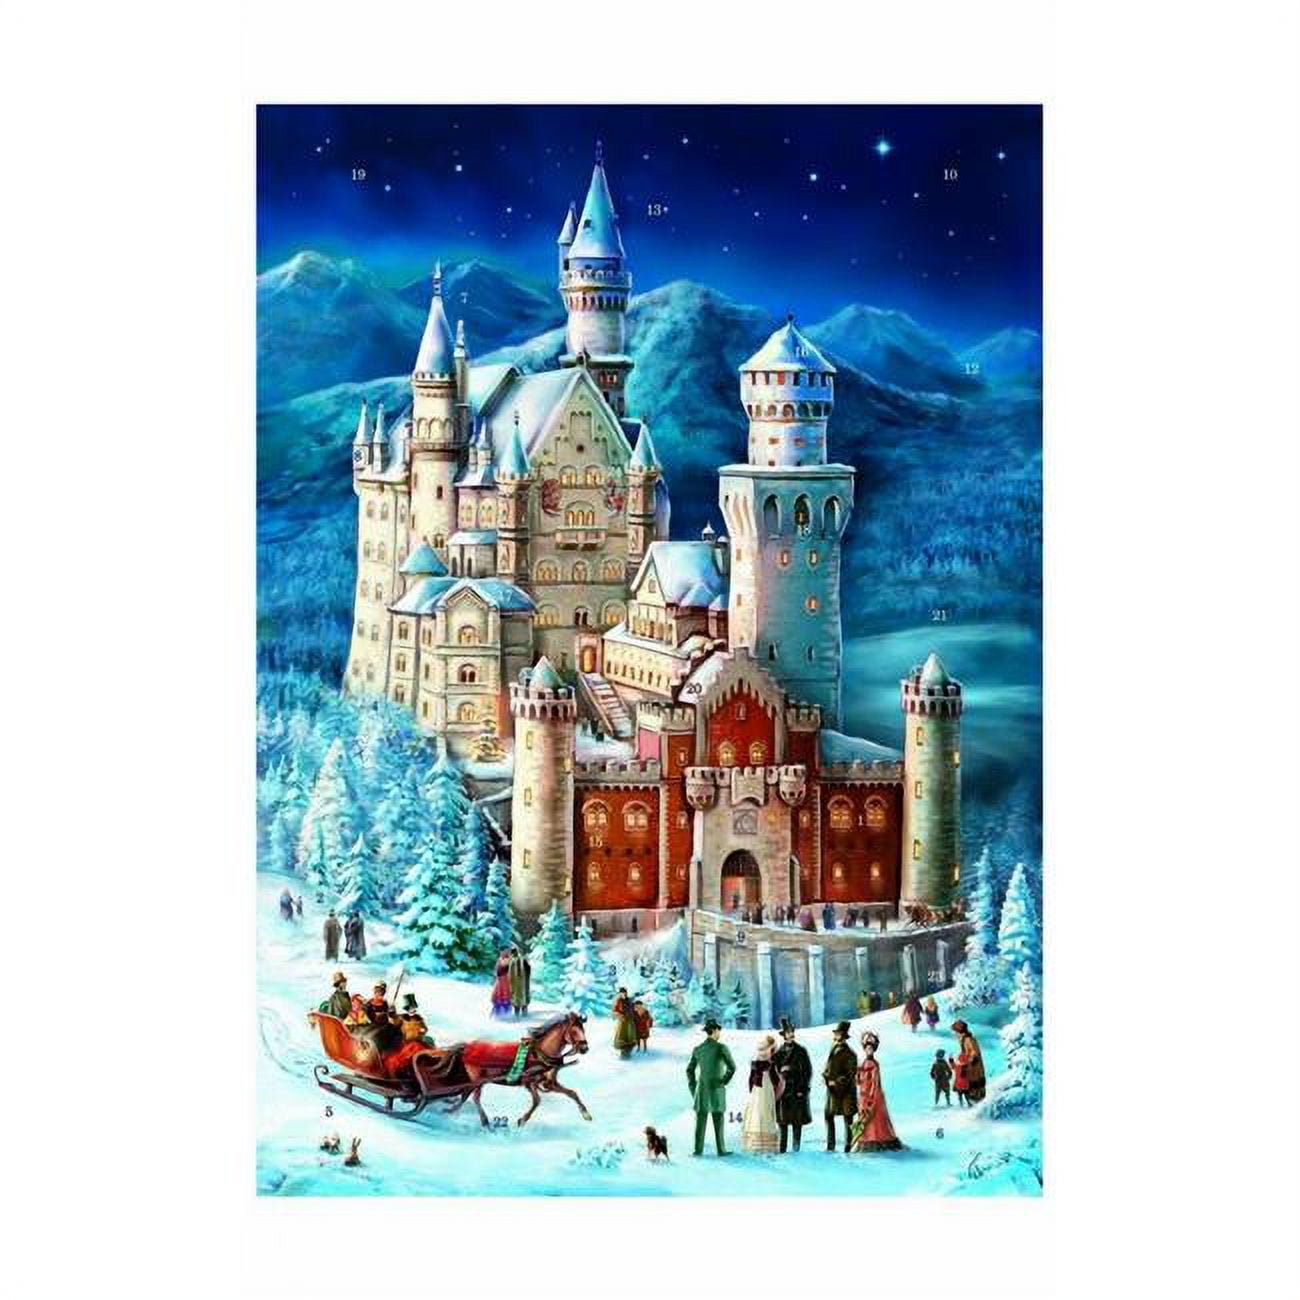 Picture of Alexander Taron ADV324 16.75 x 11.25 x 0.1 in. Sellmer Advent Calender - Neuschwanstein with No Envelope - Extra Large